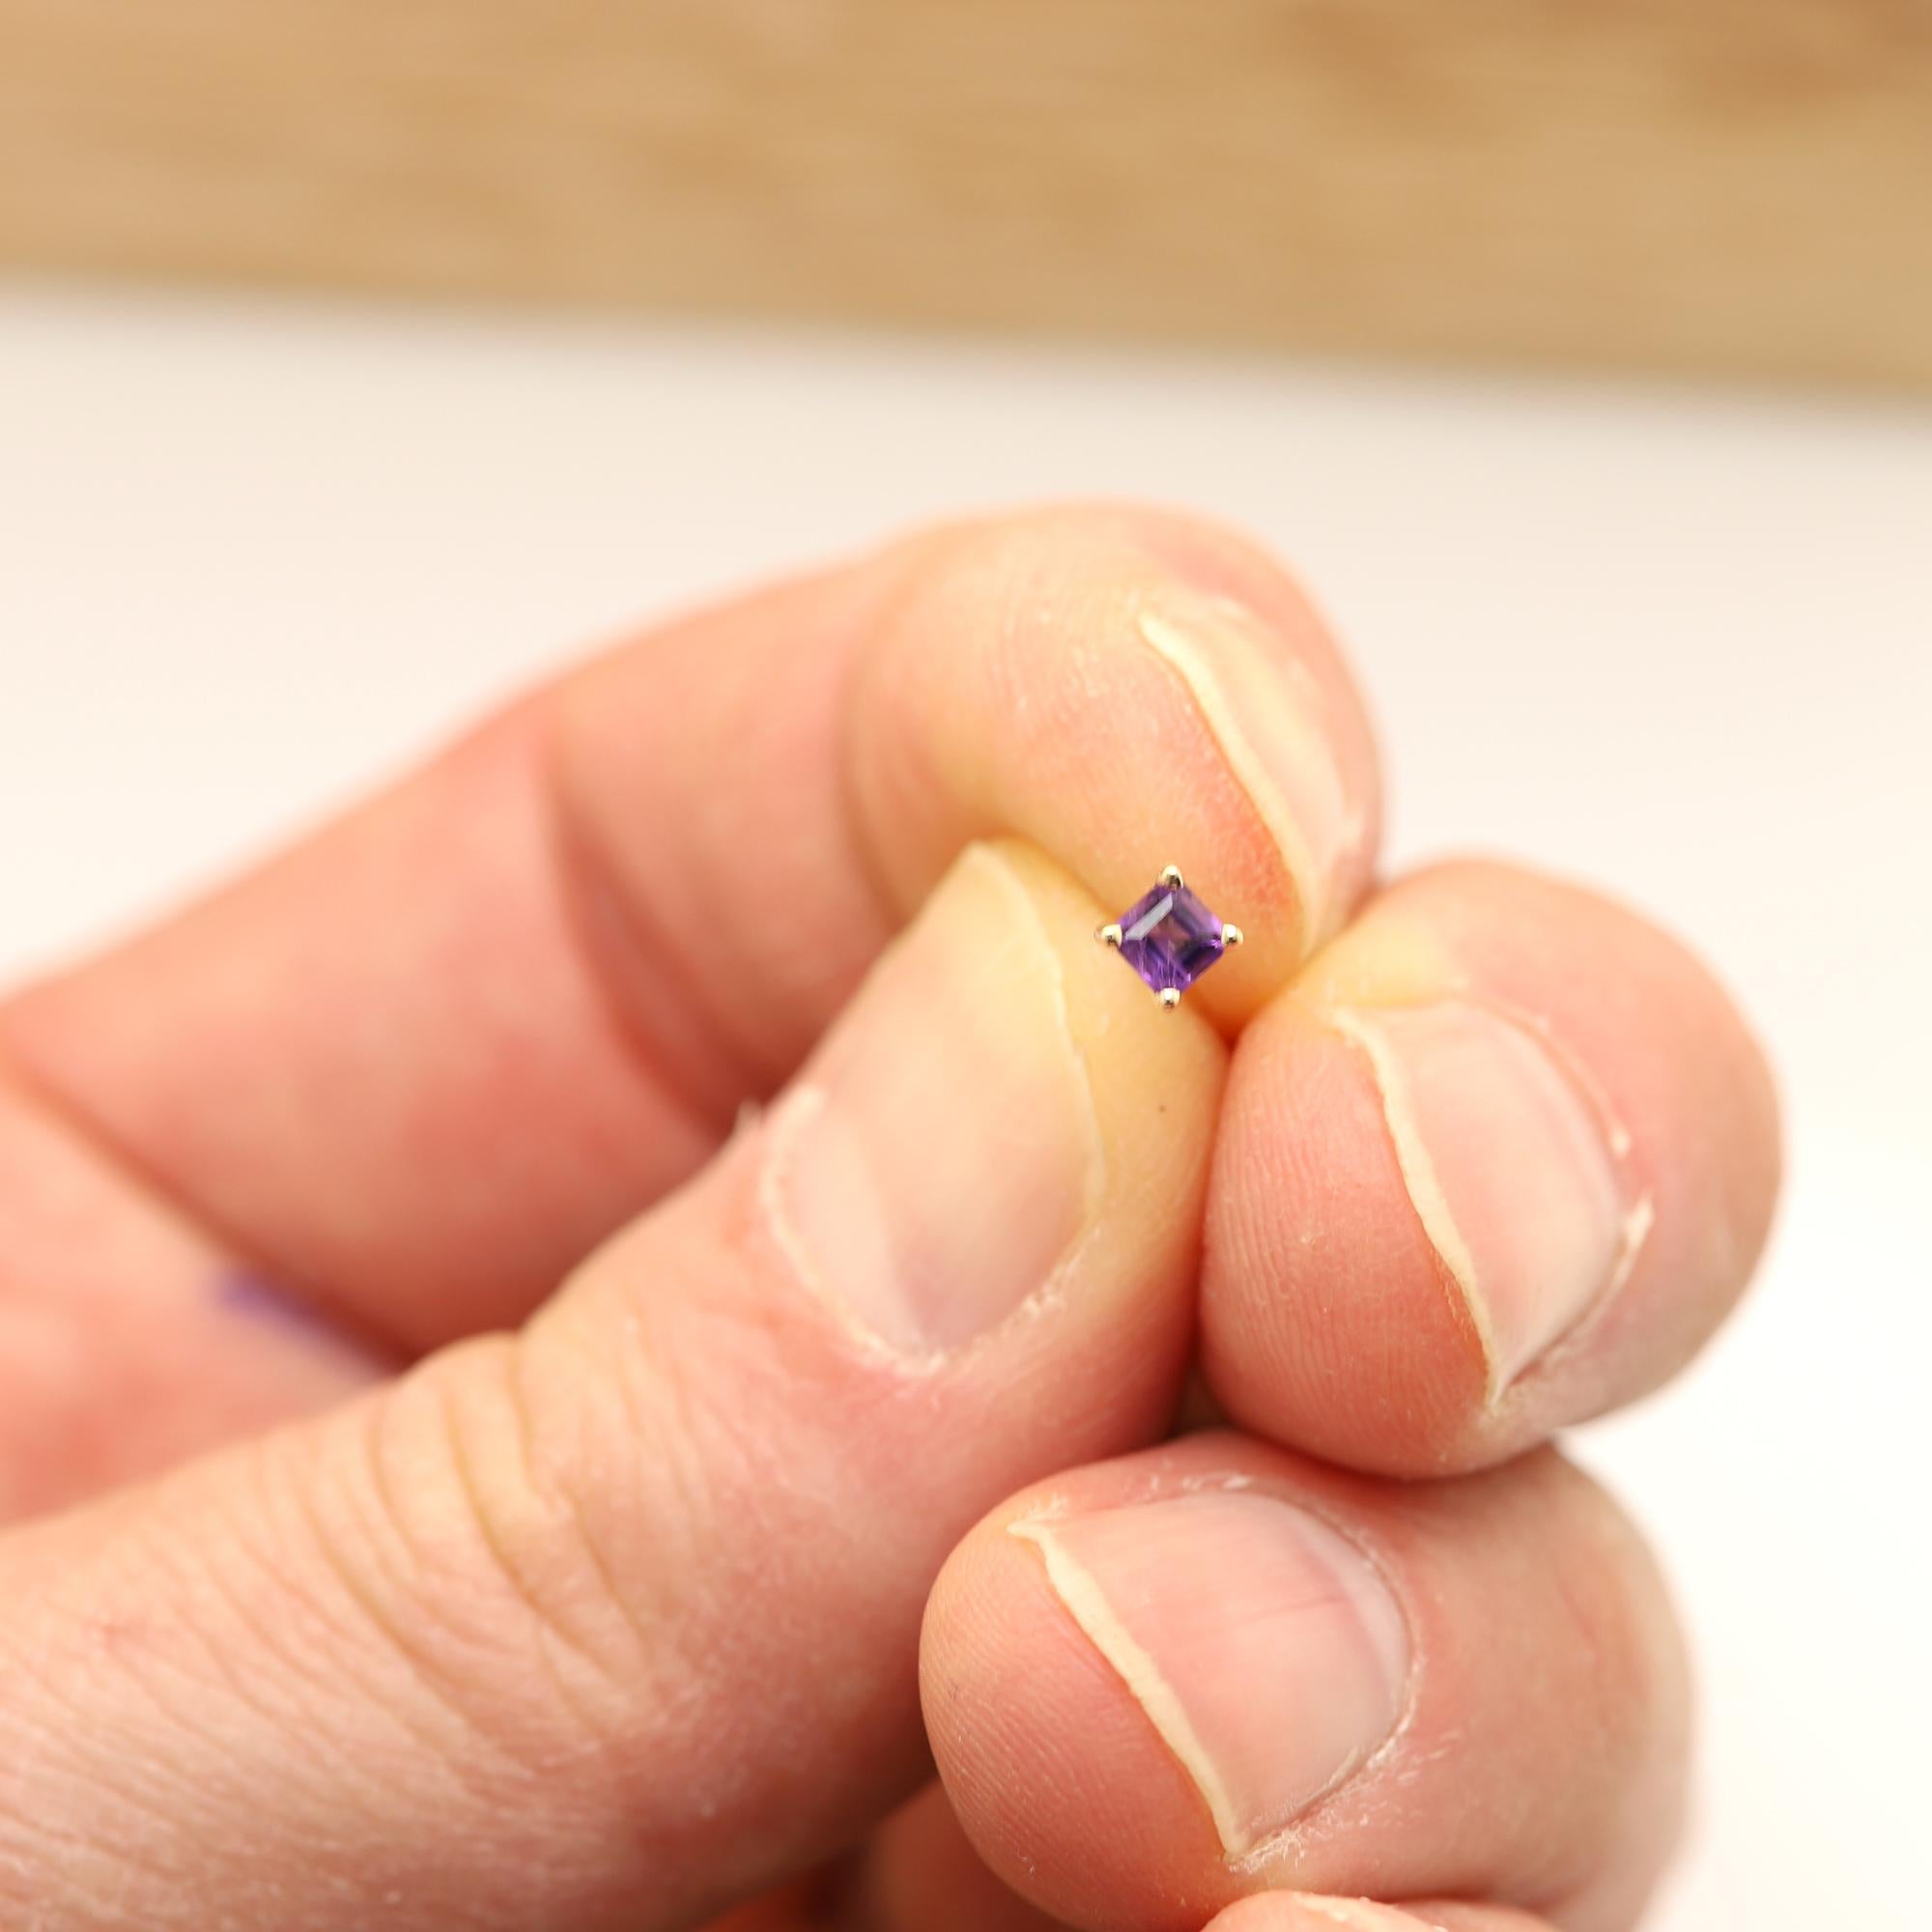 Solid 14k Yellow Gold 
Natural Purple Amethyst Gemstone
1 pair ( 2pieces )
each stone is 3.0 mm approx 0.20 carat 
Square shape
AA Quality Gems
due to natural formations minor inclusions or imperfections may occur
Good for any age
+Gift Box
